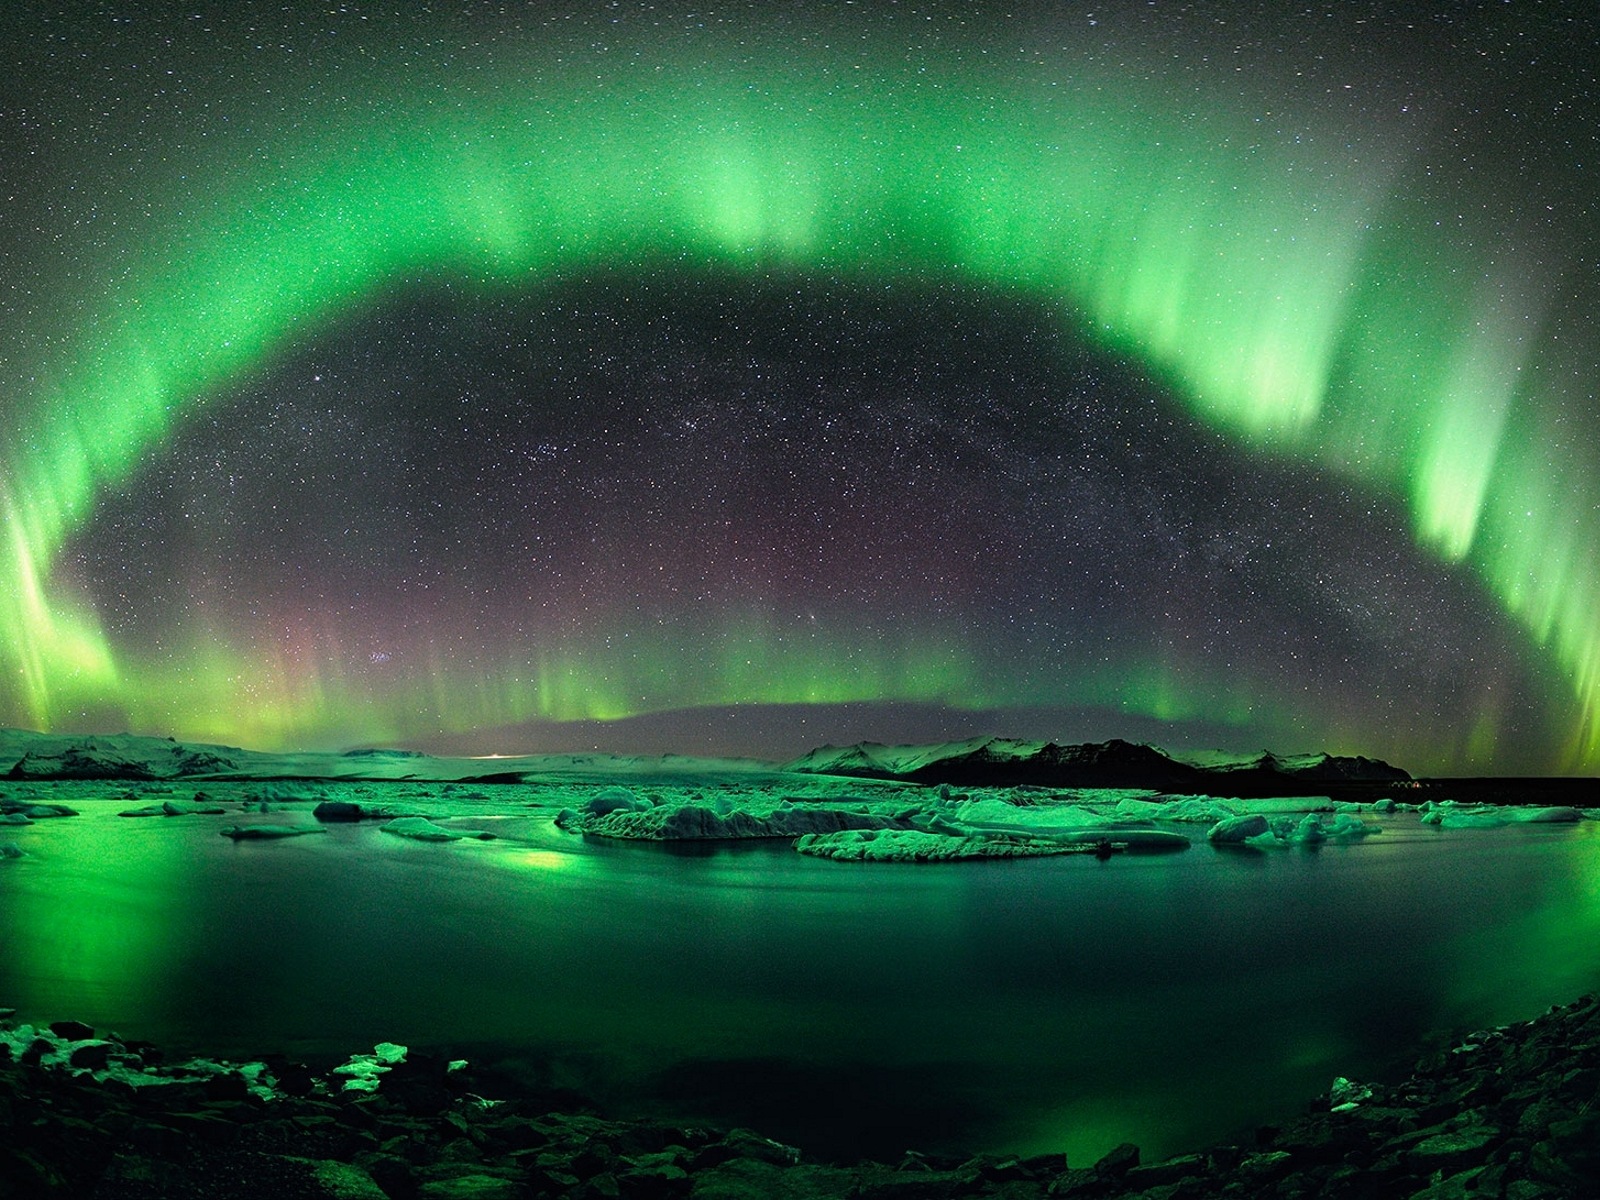 Natural wonders of the Northern Lights HD Wallpaper (2) #10 - 1600x1200